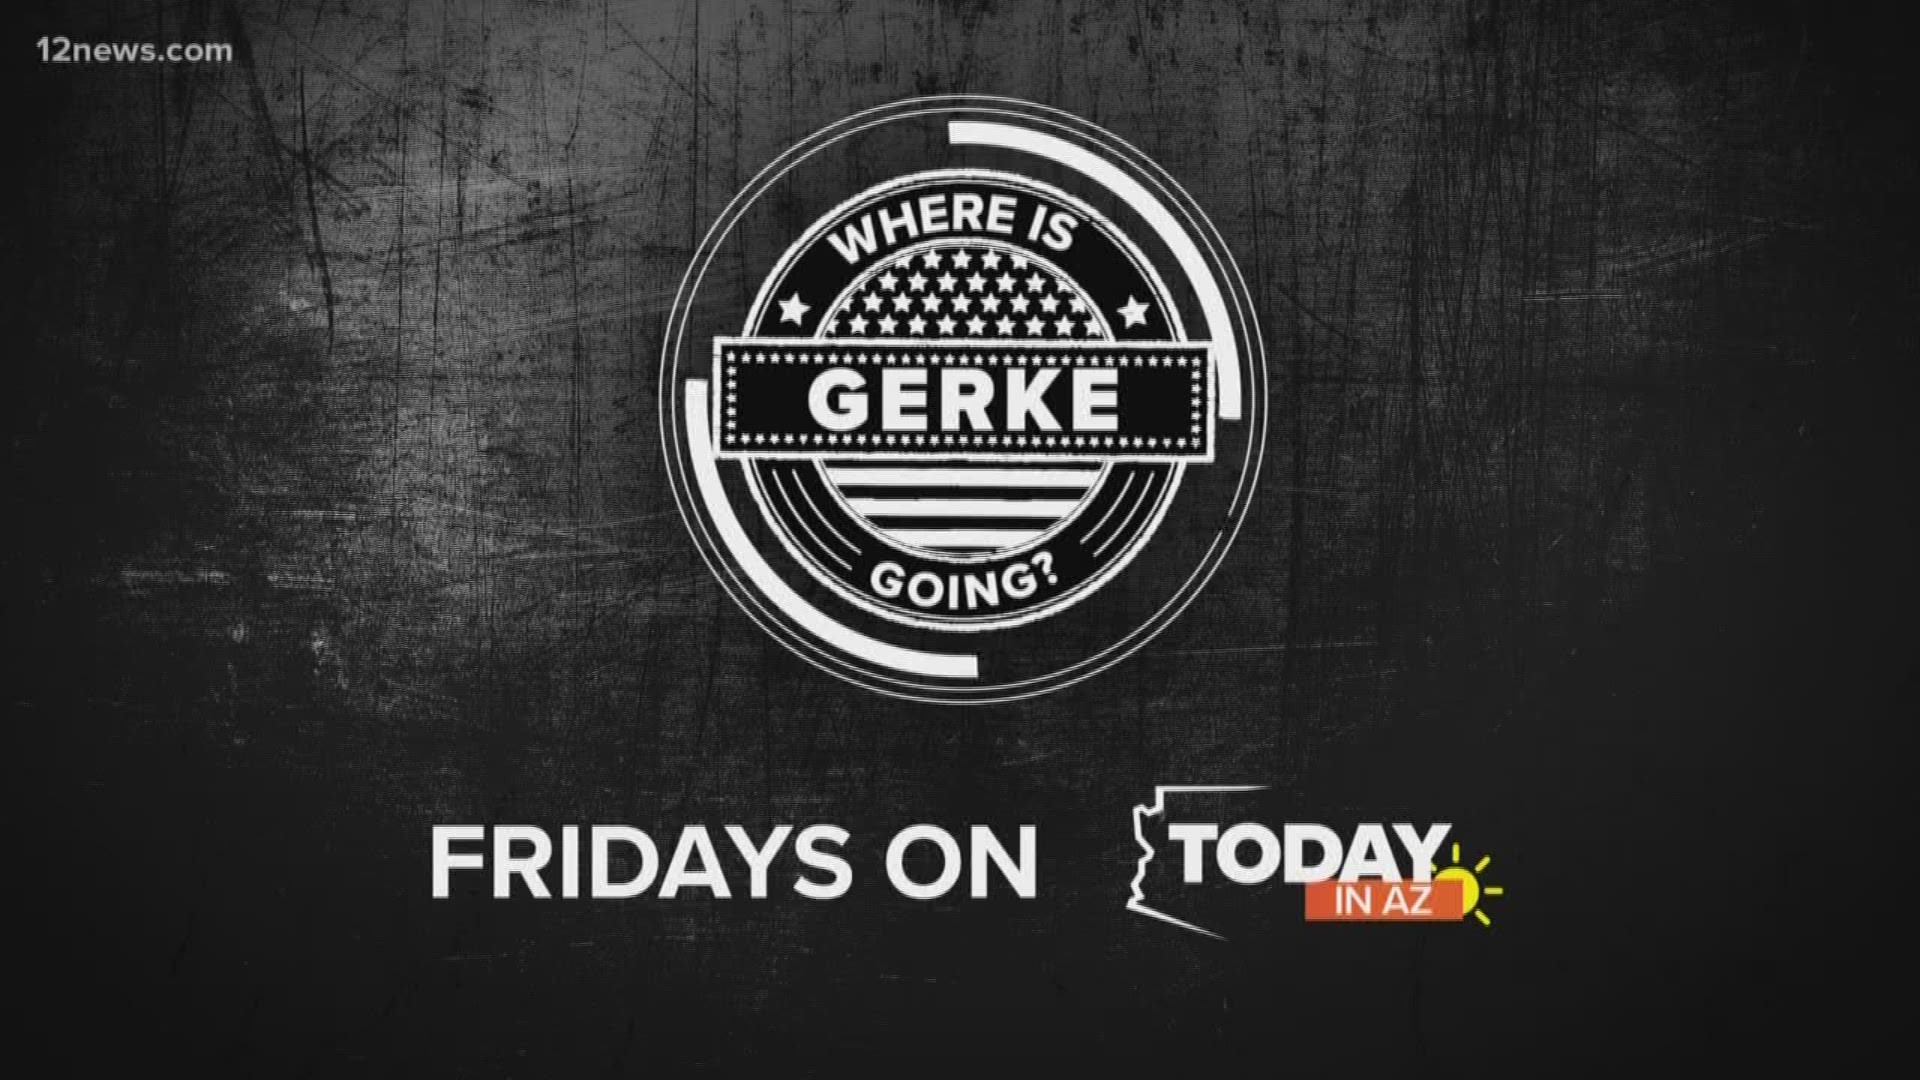 Our "Wheres Gerke Going" series returns and the first stop for 2019 will be on April 26!